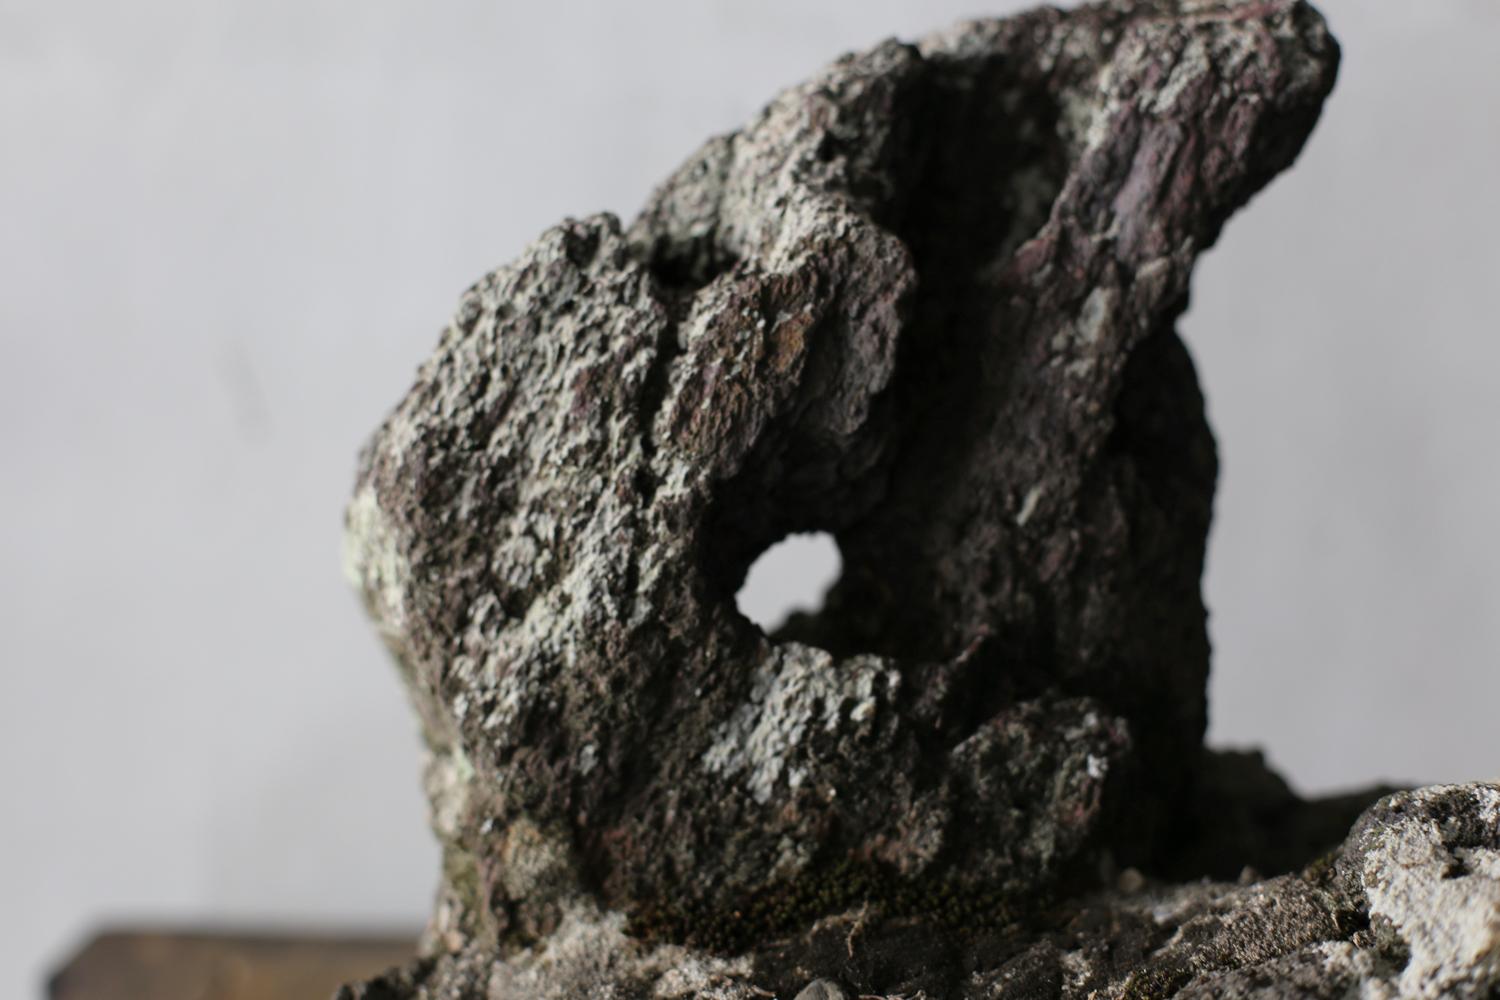 Japanese Stone Object with a hole 4